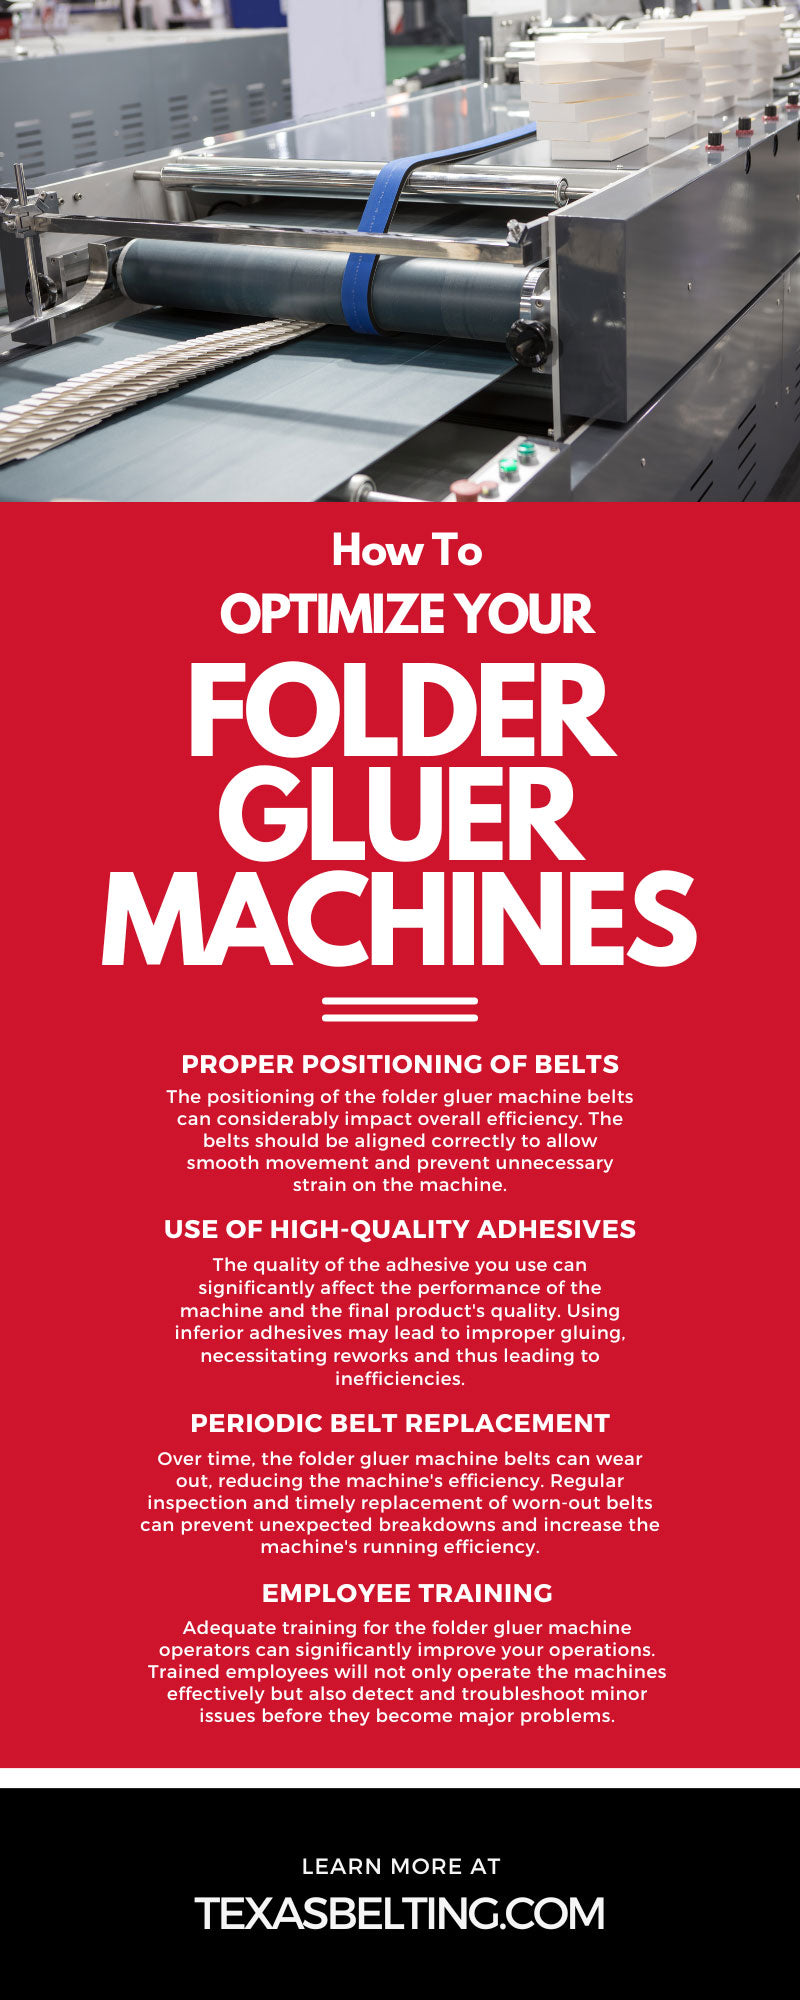 How To Optimize Your Folder Gluer Machines